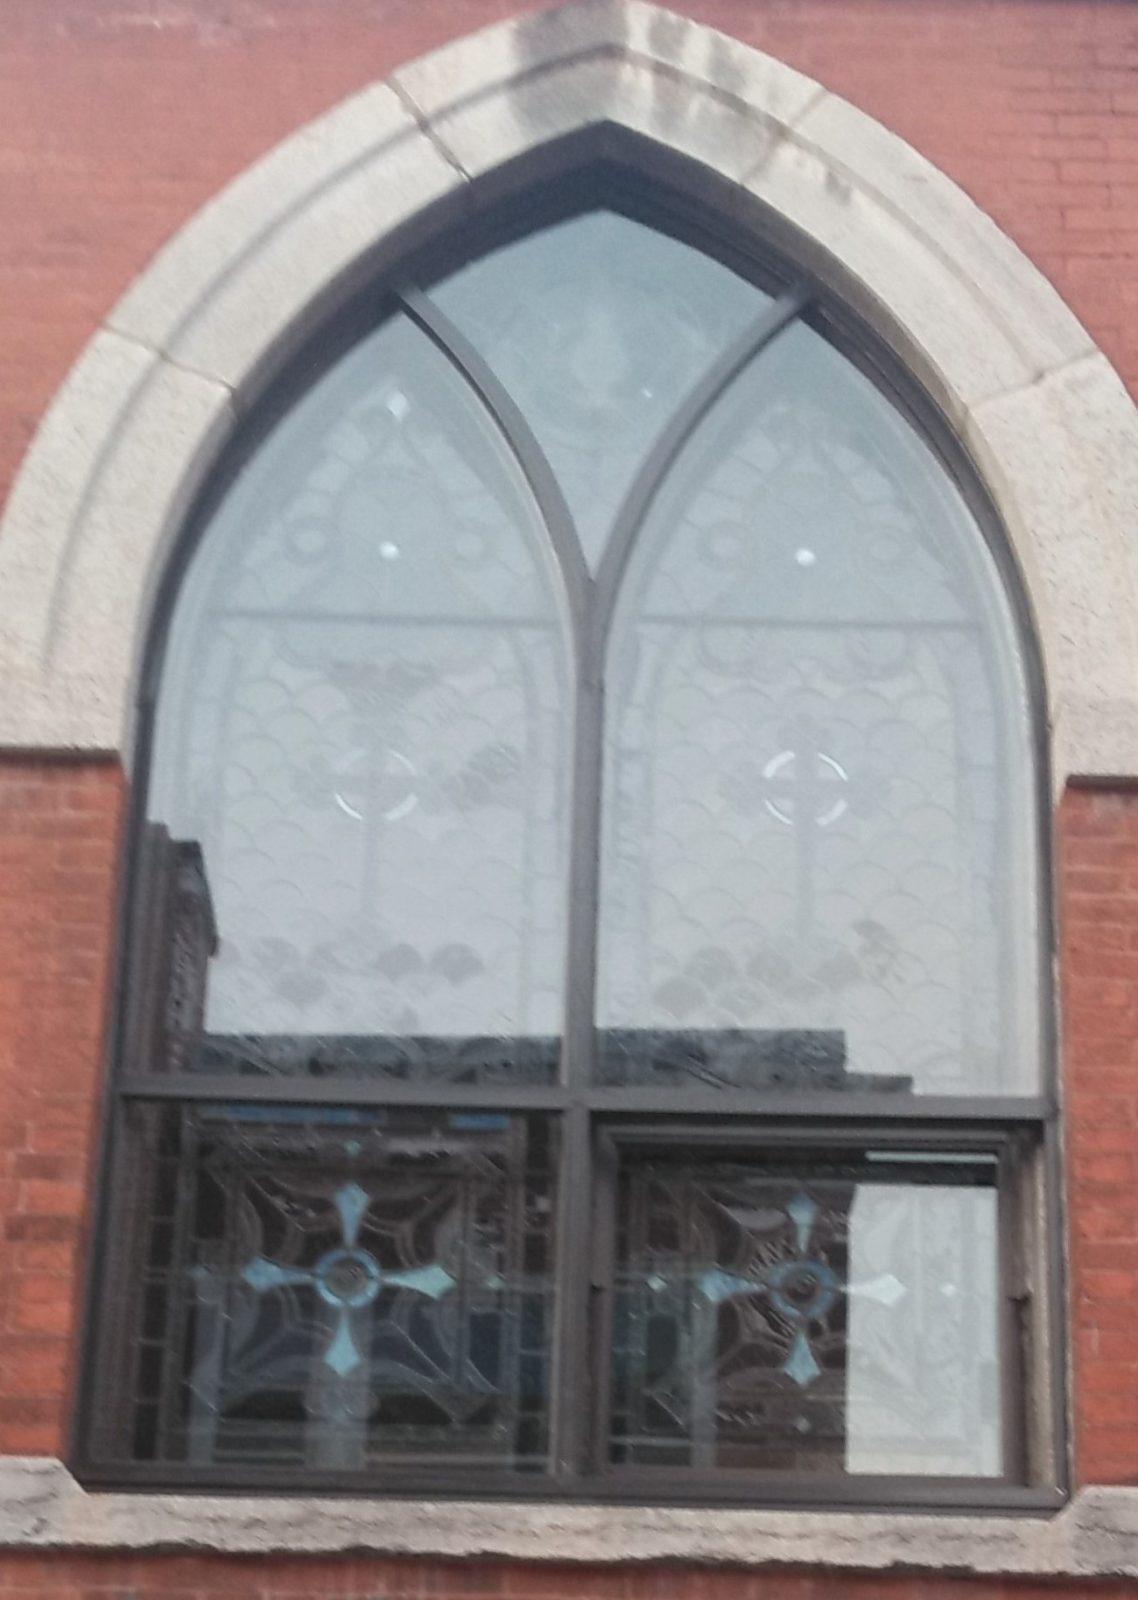 stained glass window repair, stained glass window frame repair, stained glass protecitive coverings